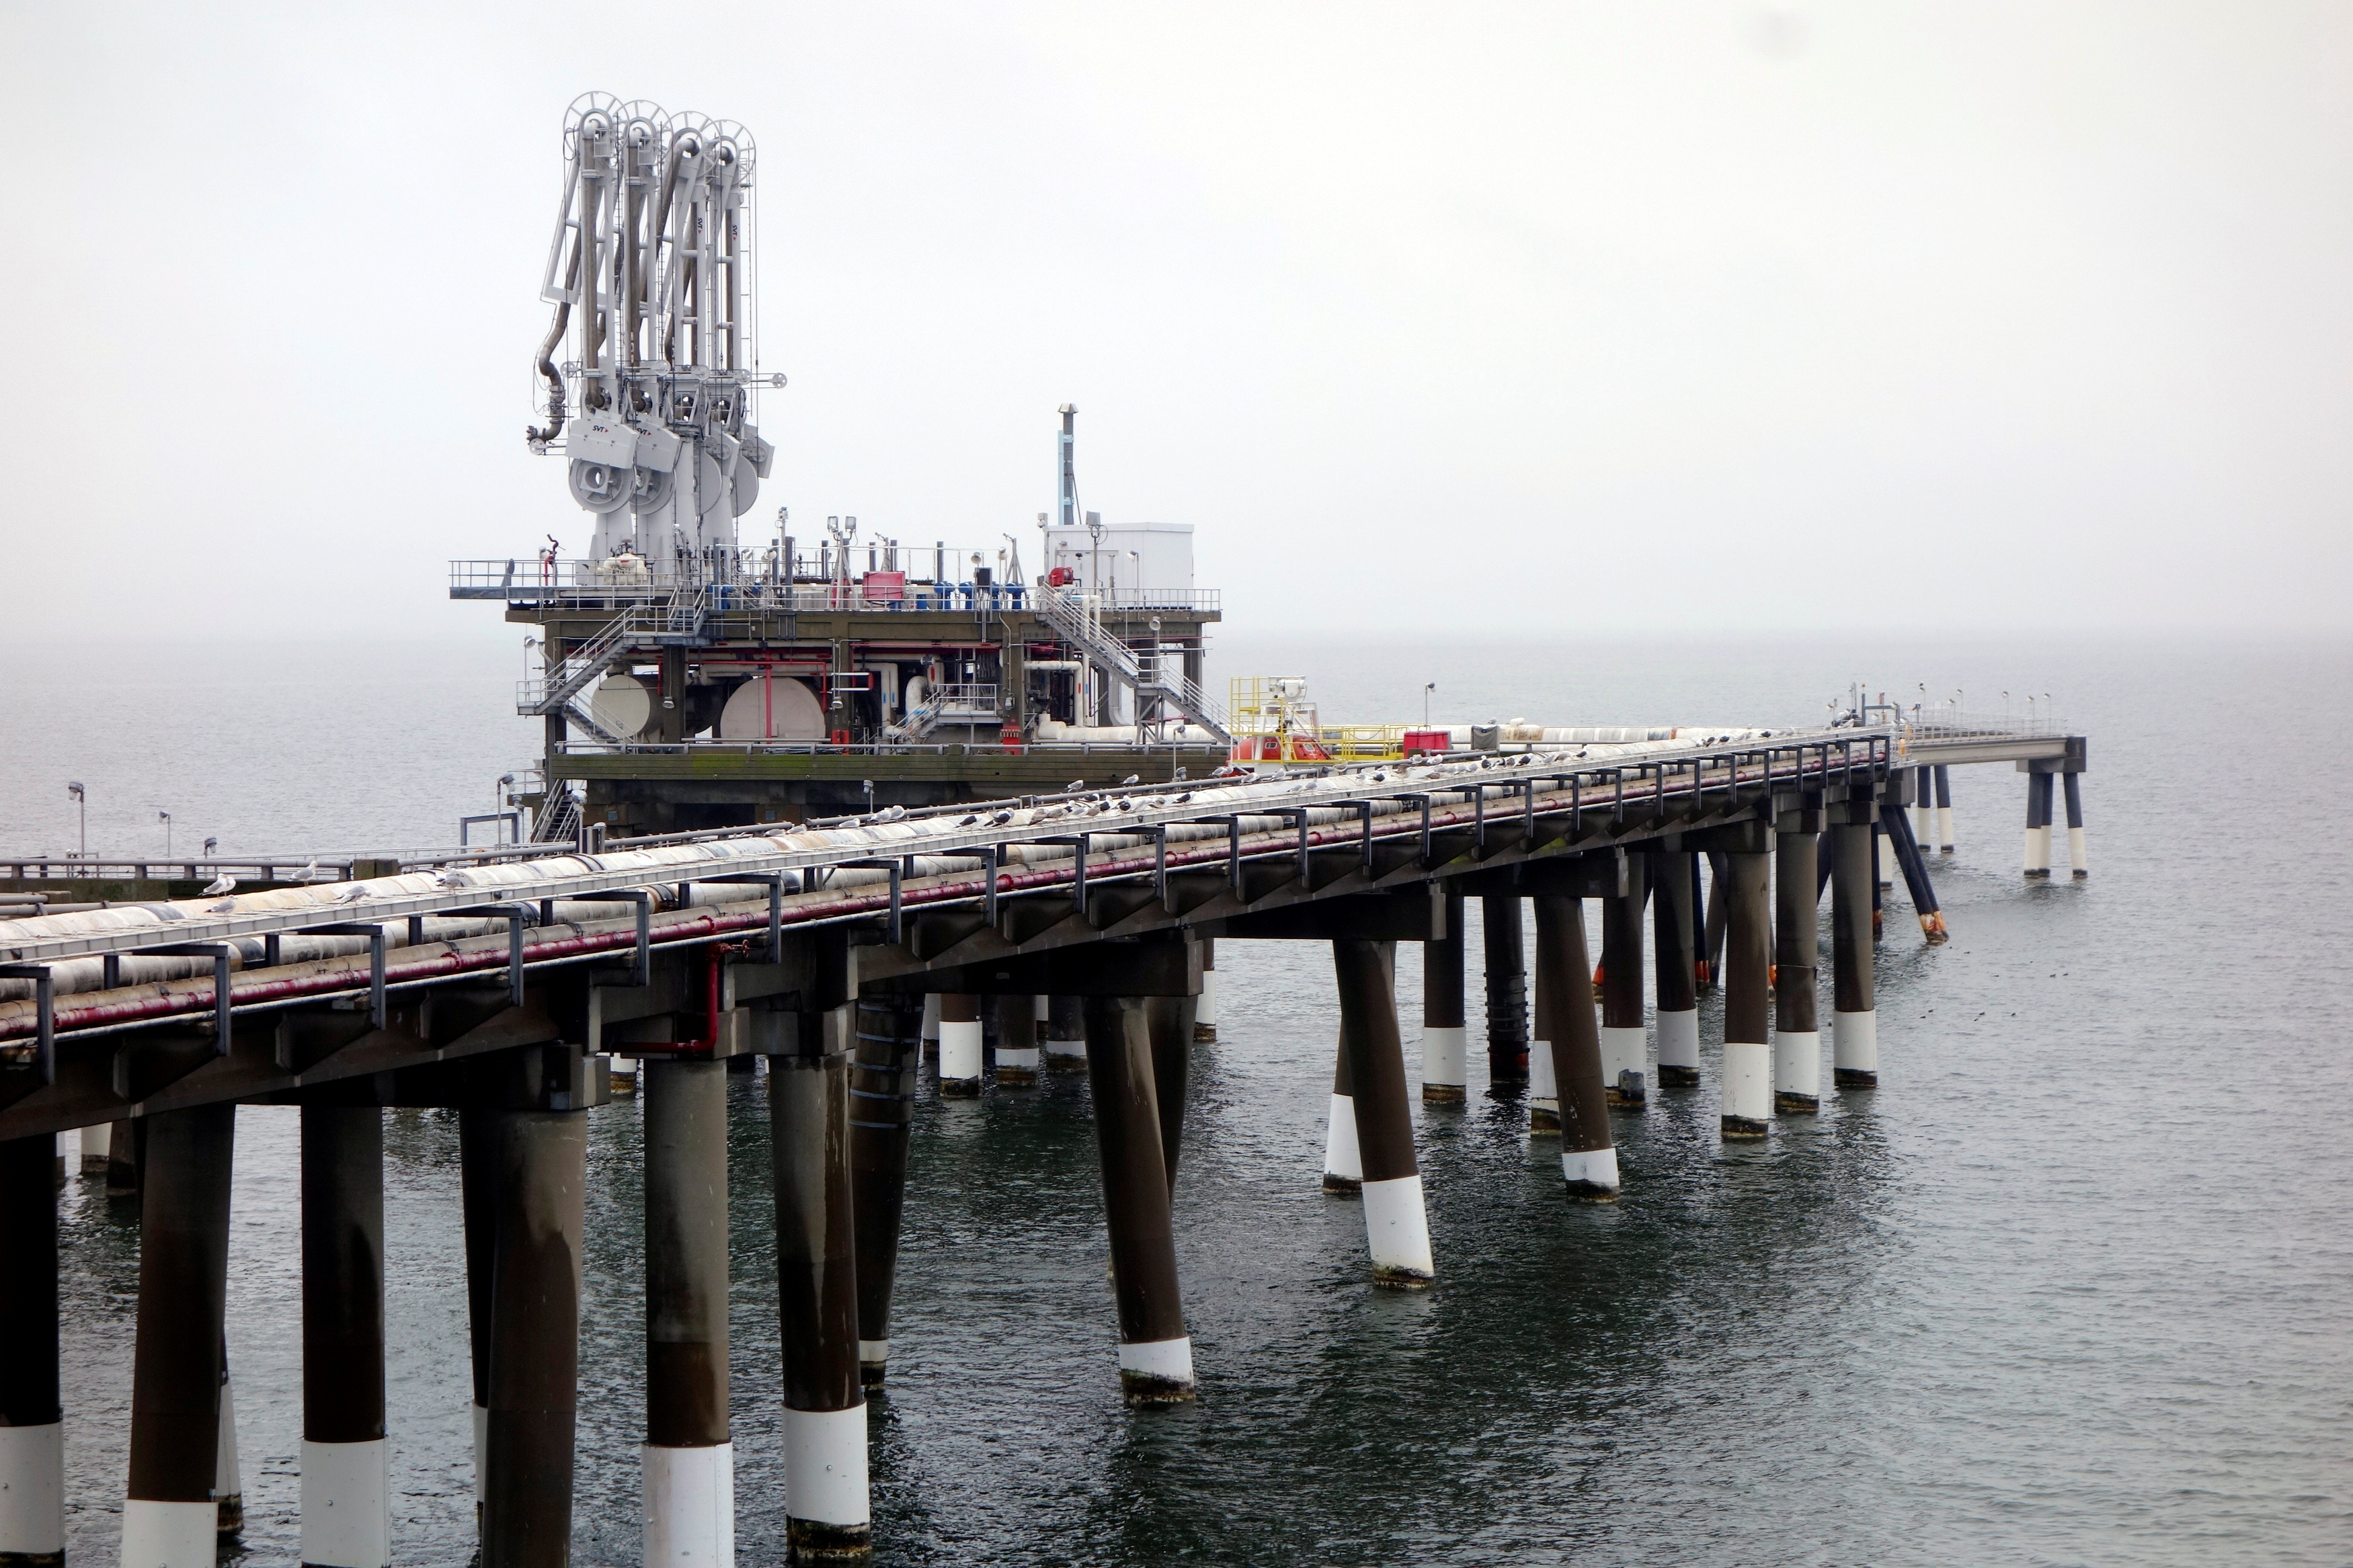 The pier at Dominion's Cove Point liquefied natural gas (LNG) plant on Maryland's Chesapeake Bay is seen in this picture taken February 5, 2014.  REUTERS/Timothy Gardner  